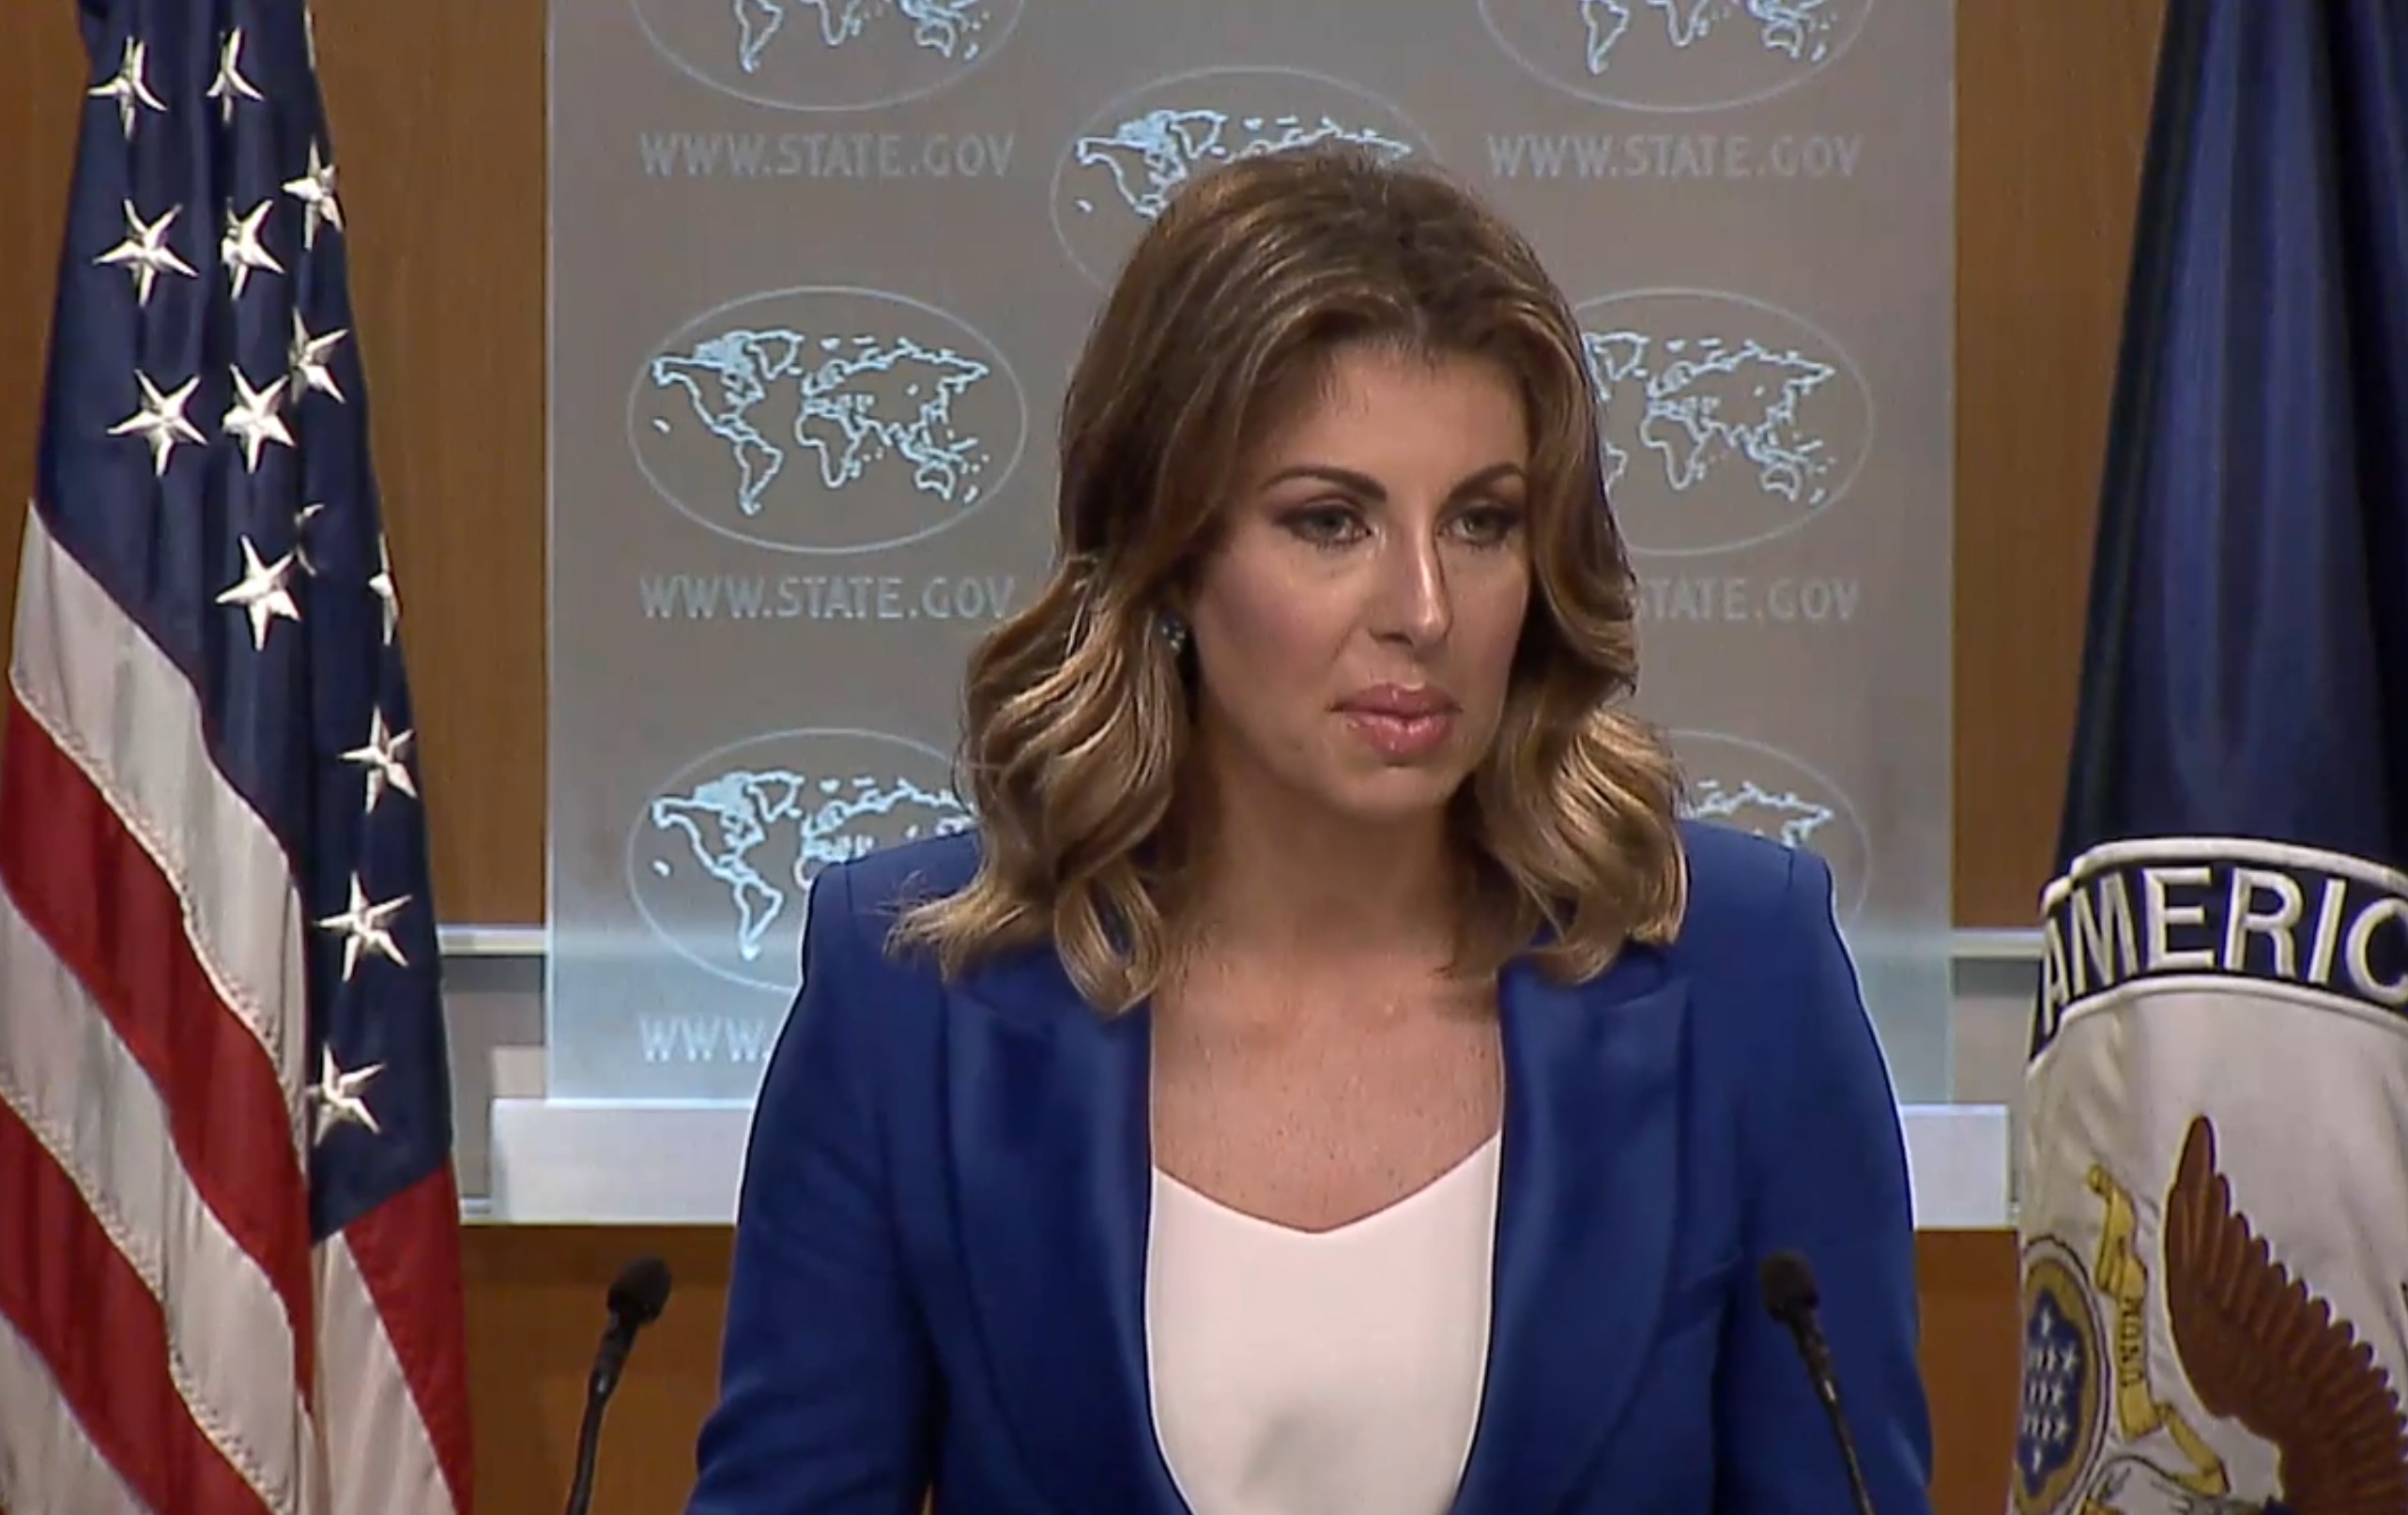 State Department spokeswoman Morgan Ortagus speaks to the press during a briefing in Washington yesterday. Screegrab via US State Dept video.